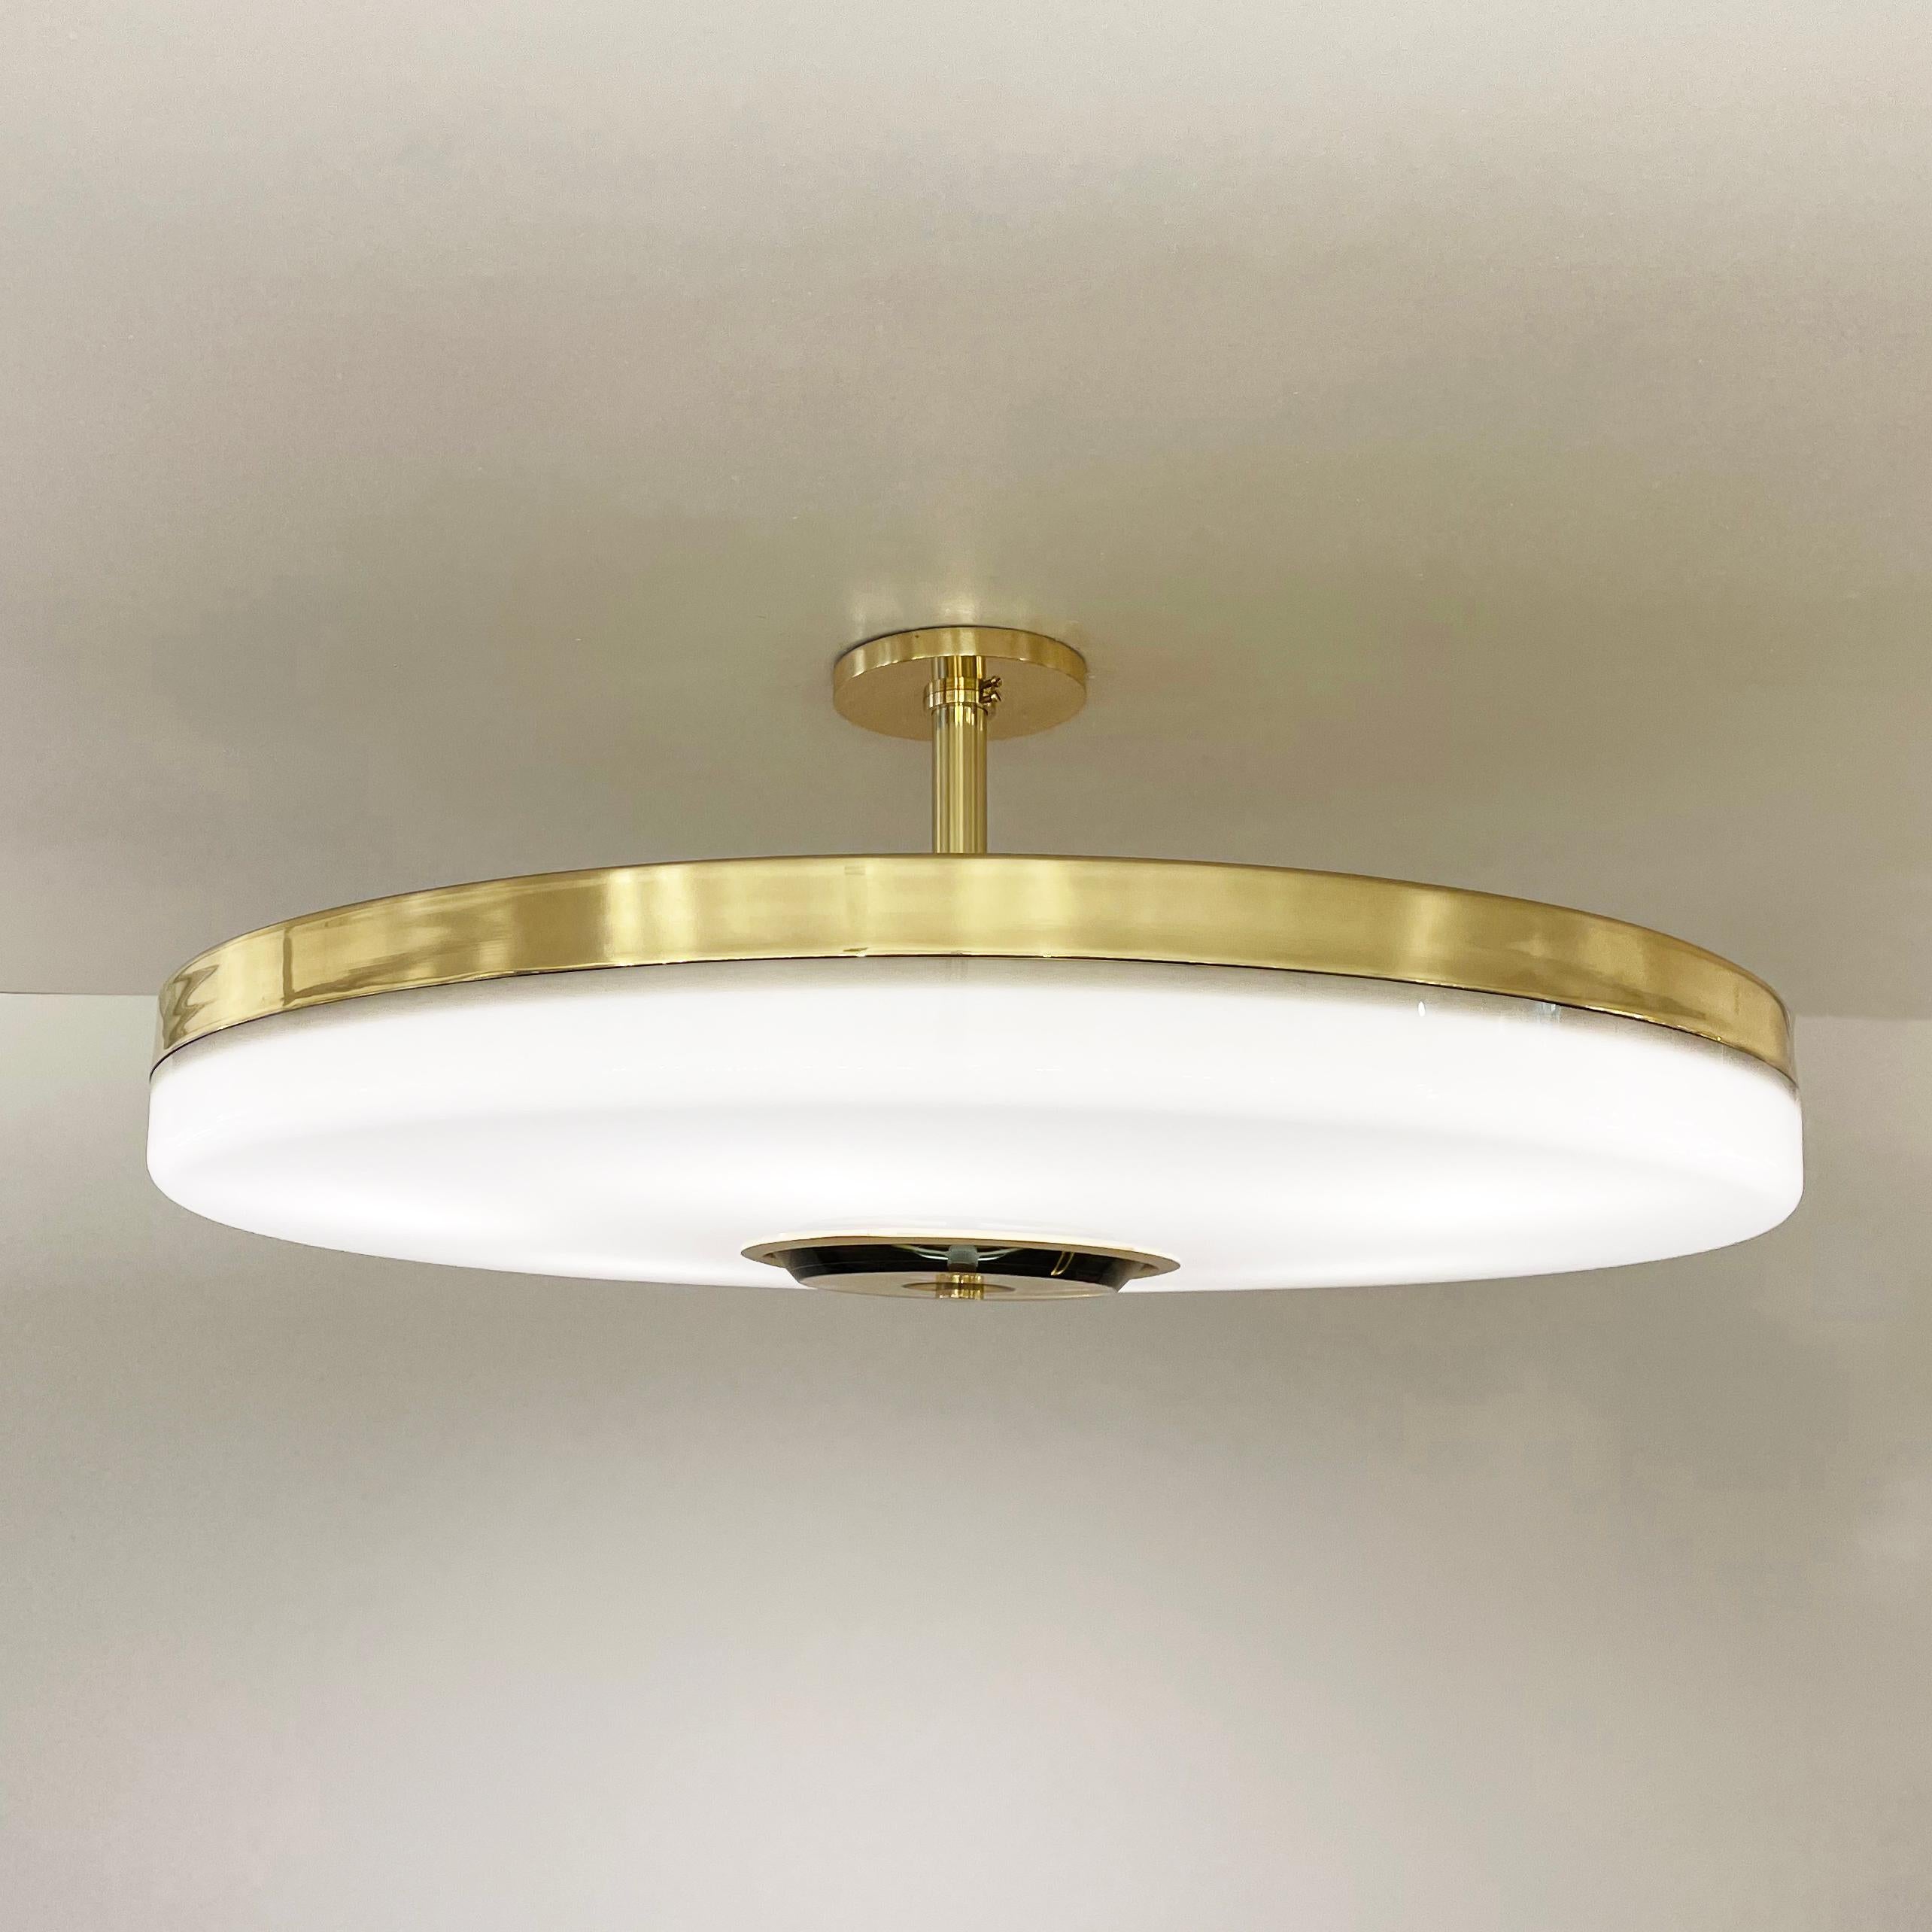 Iris Ceiling Light by Gaspare Asaro - Polished Nickel Finish For Sale 1